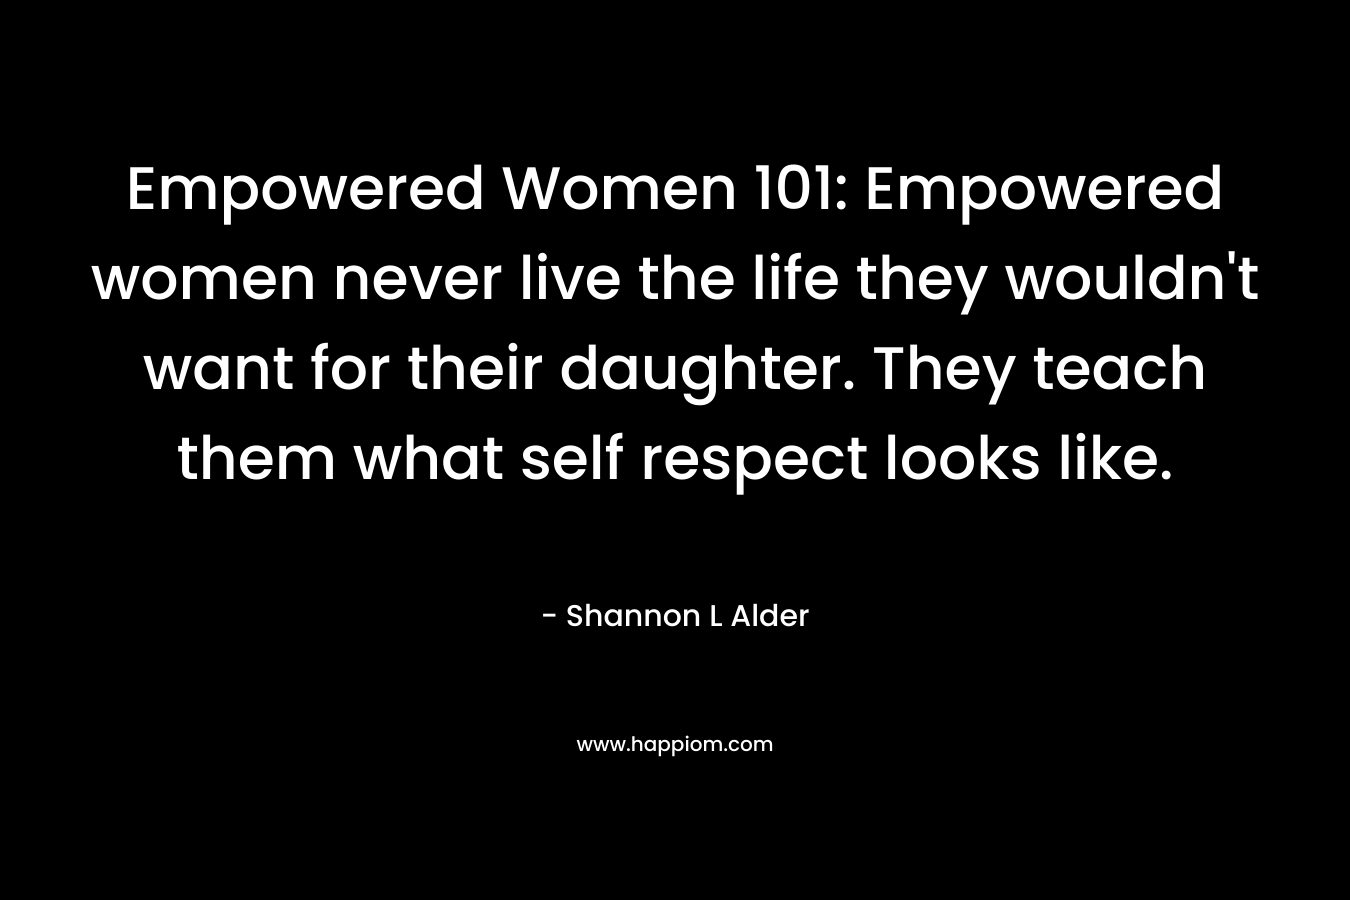 Empowered Women 101: Empowered women never live the life they wouldn't want for their daughter. They teach them what self respect looks like.